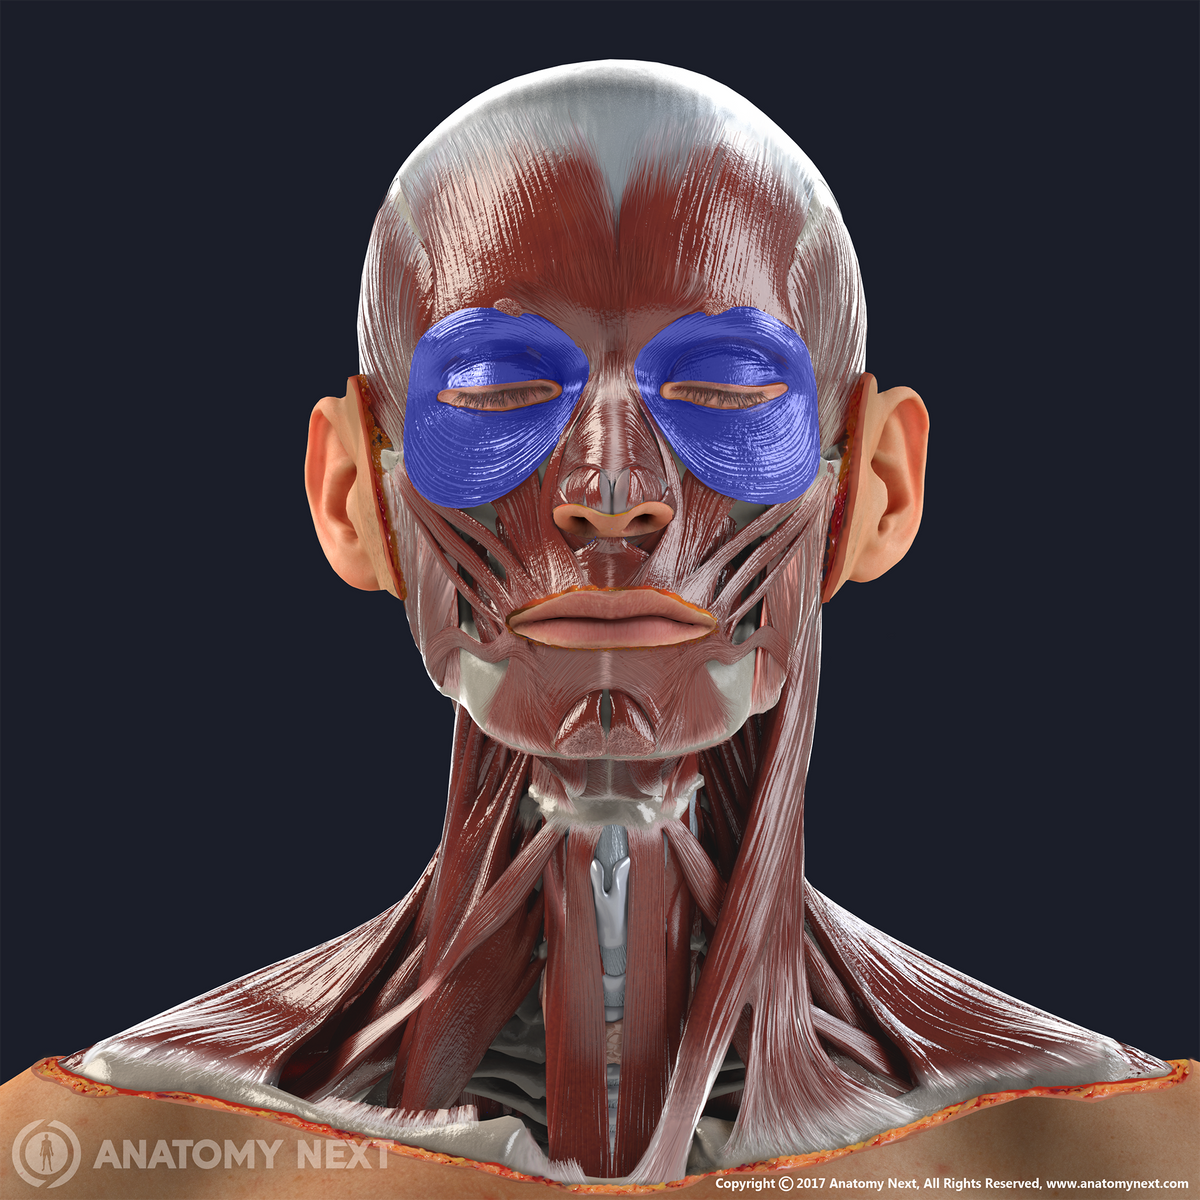 Orbicularis oculi muscle with other facial muscles